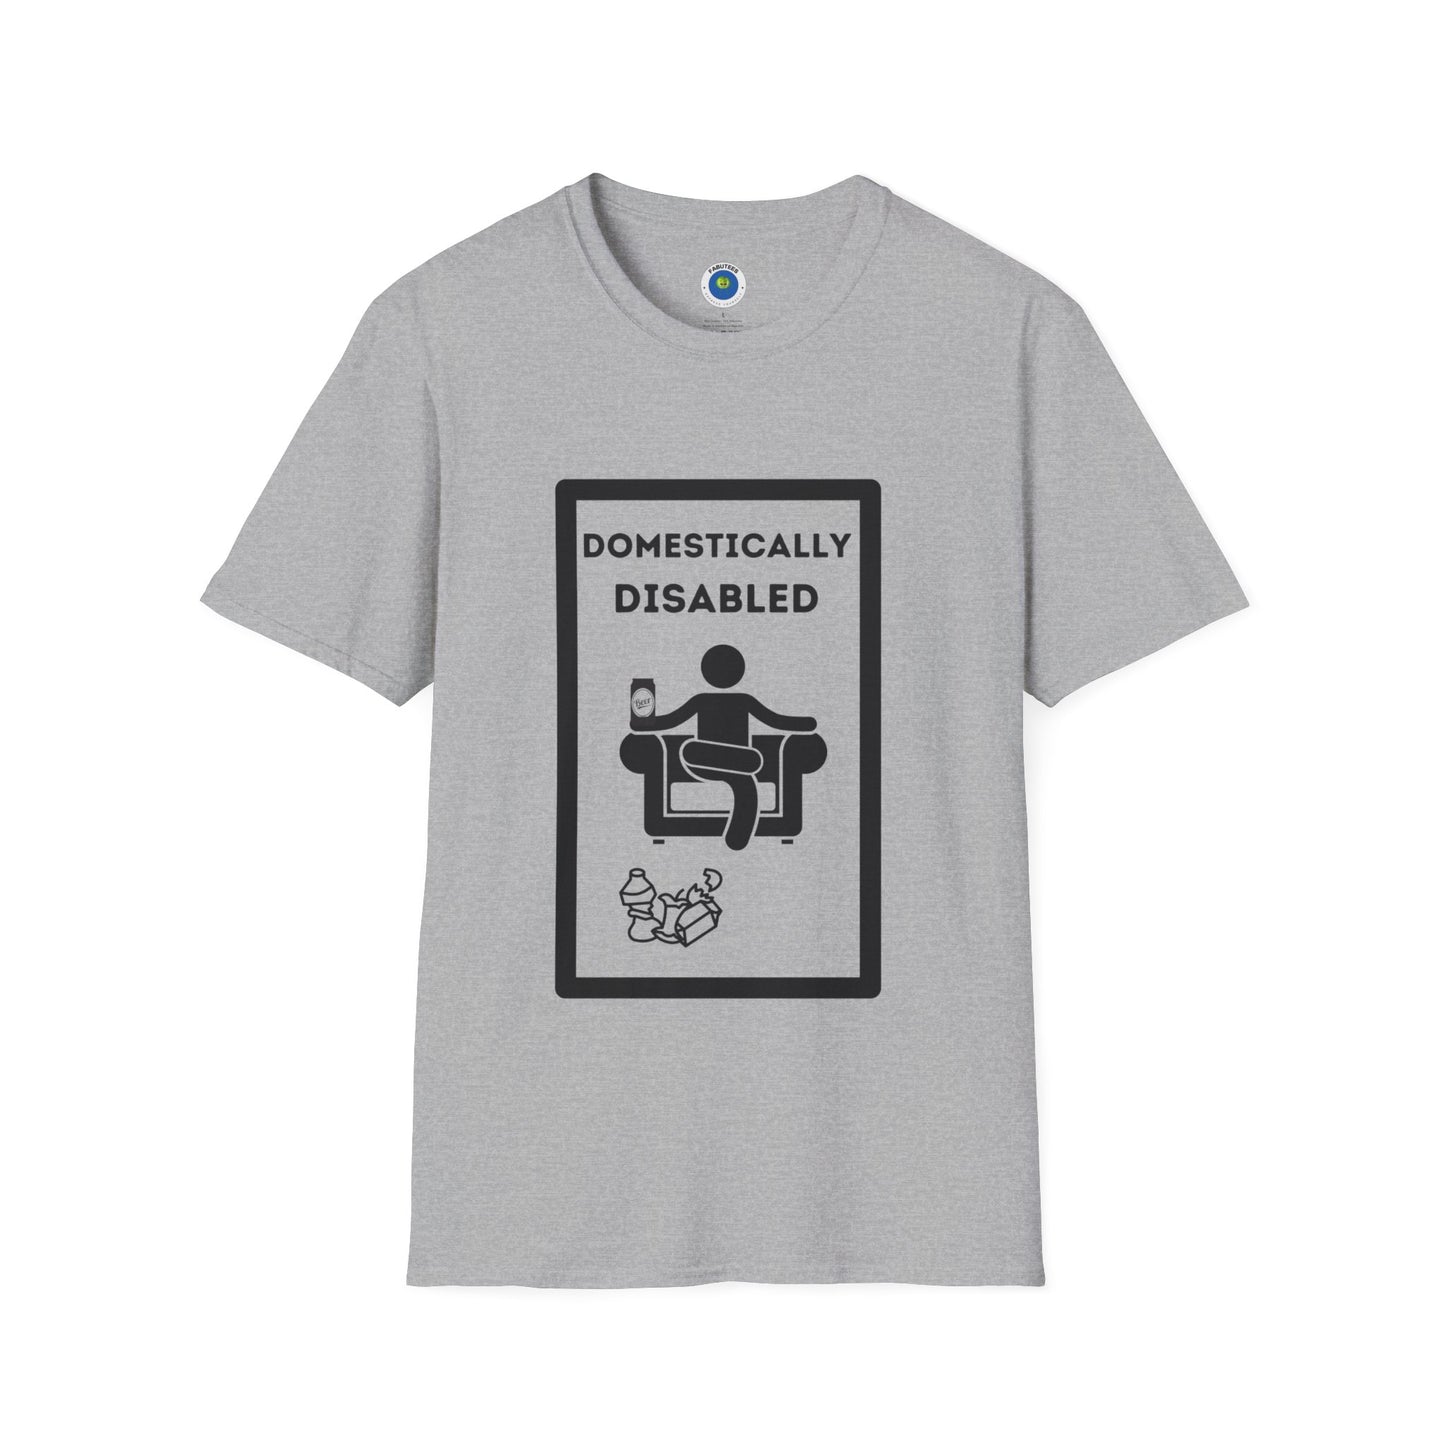 Domestically Disabled T-Shirt